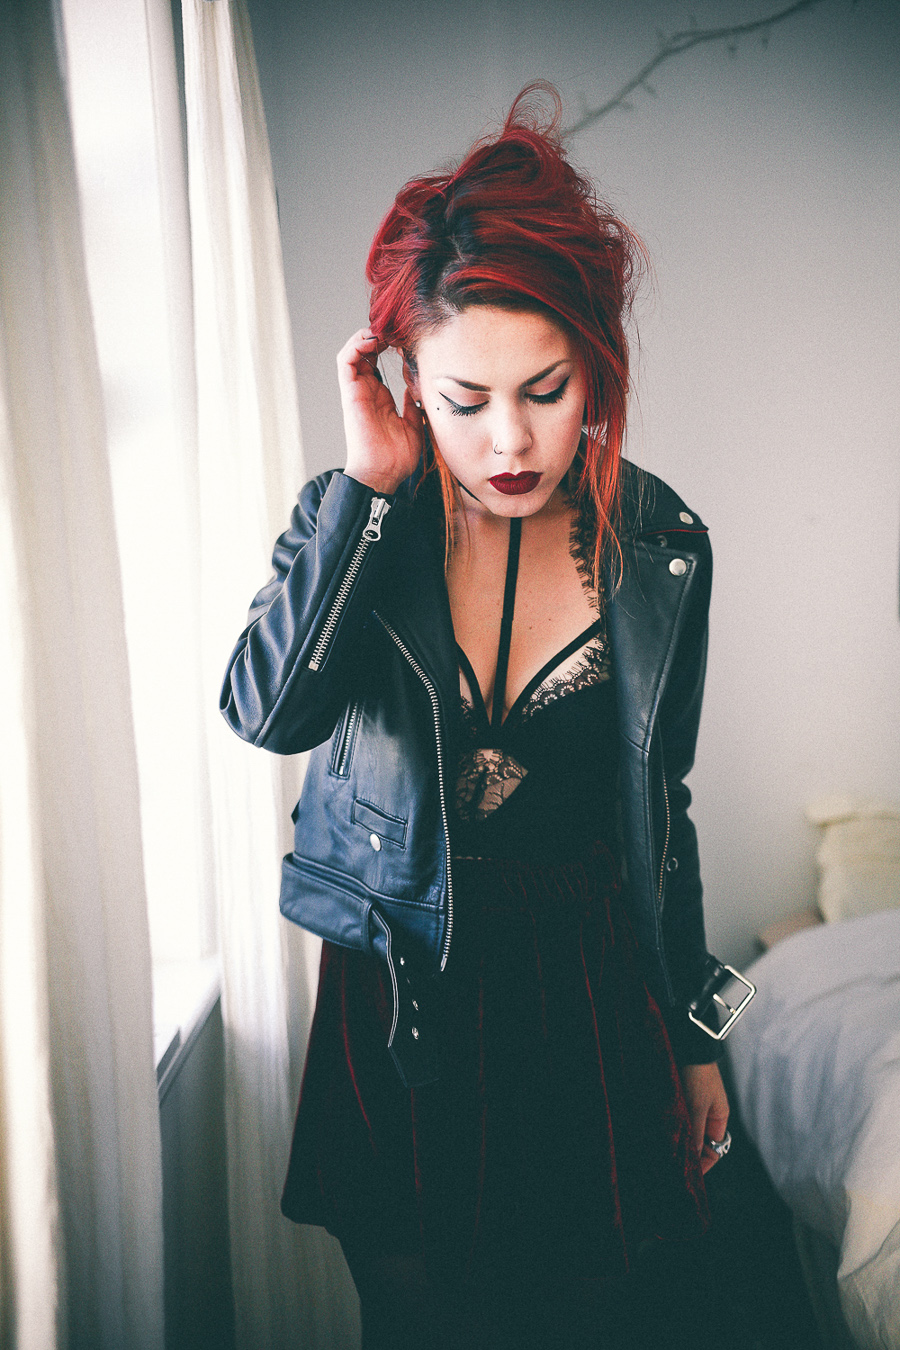 Le Happy wearing Nasty Gal biker jacket and lace corset